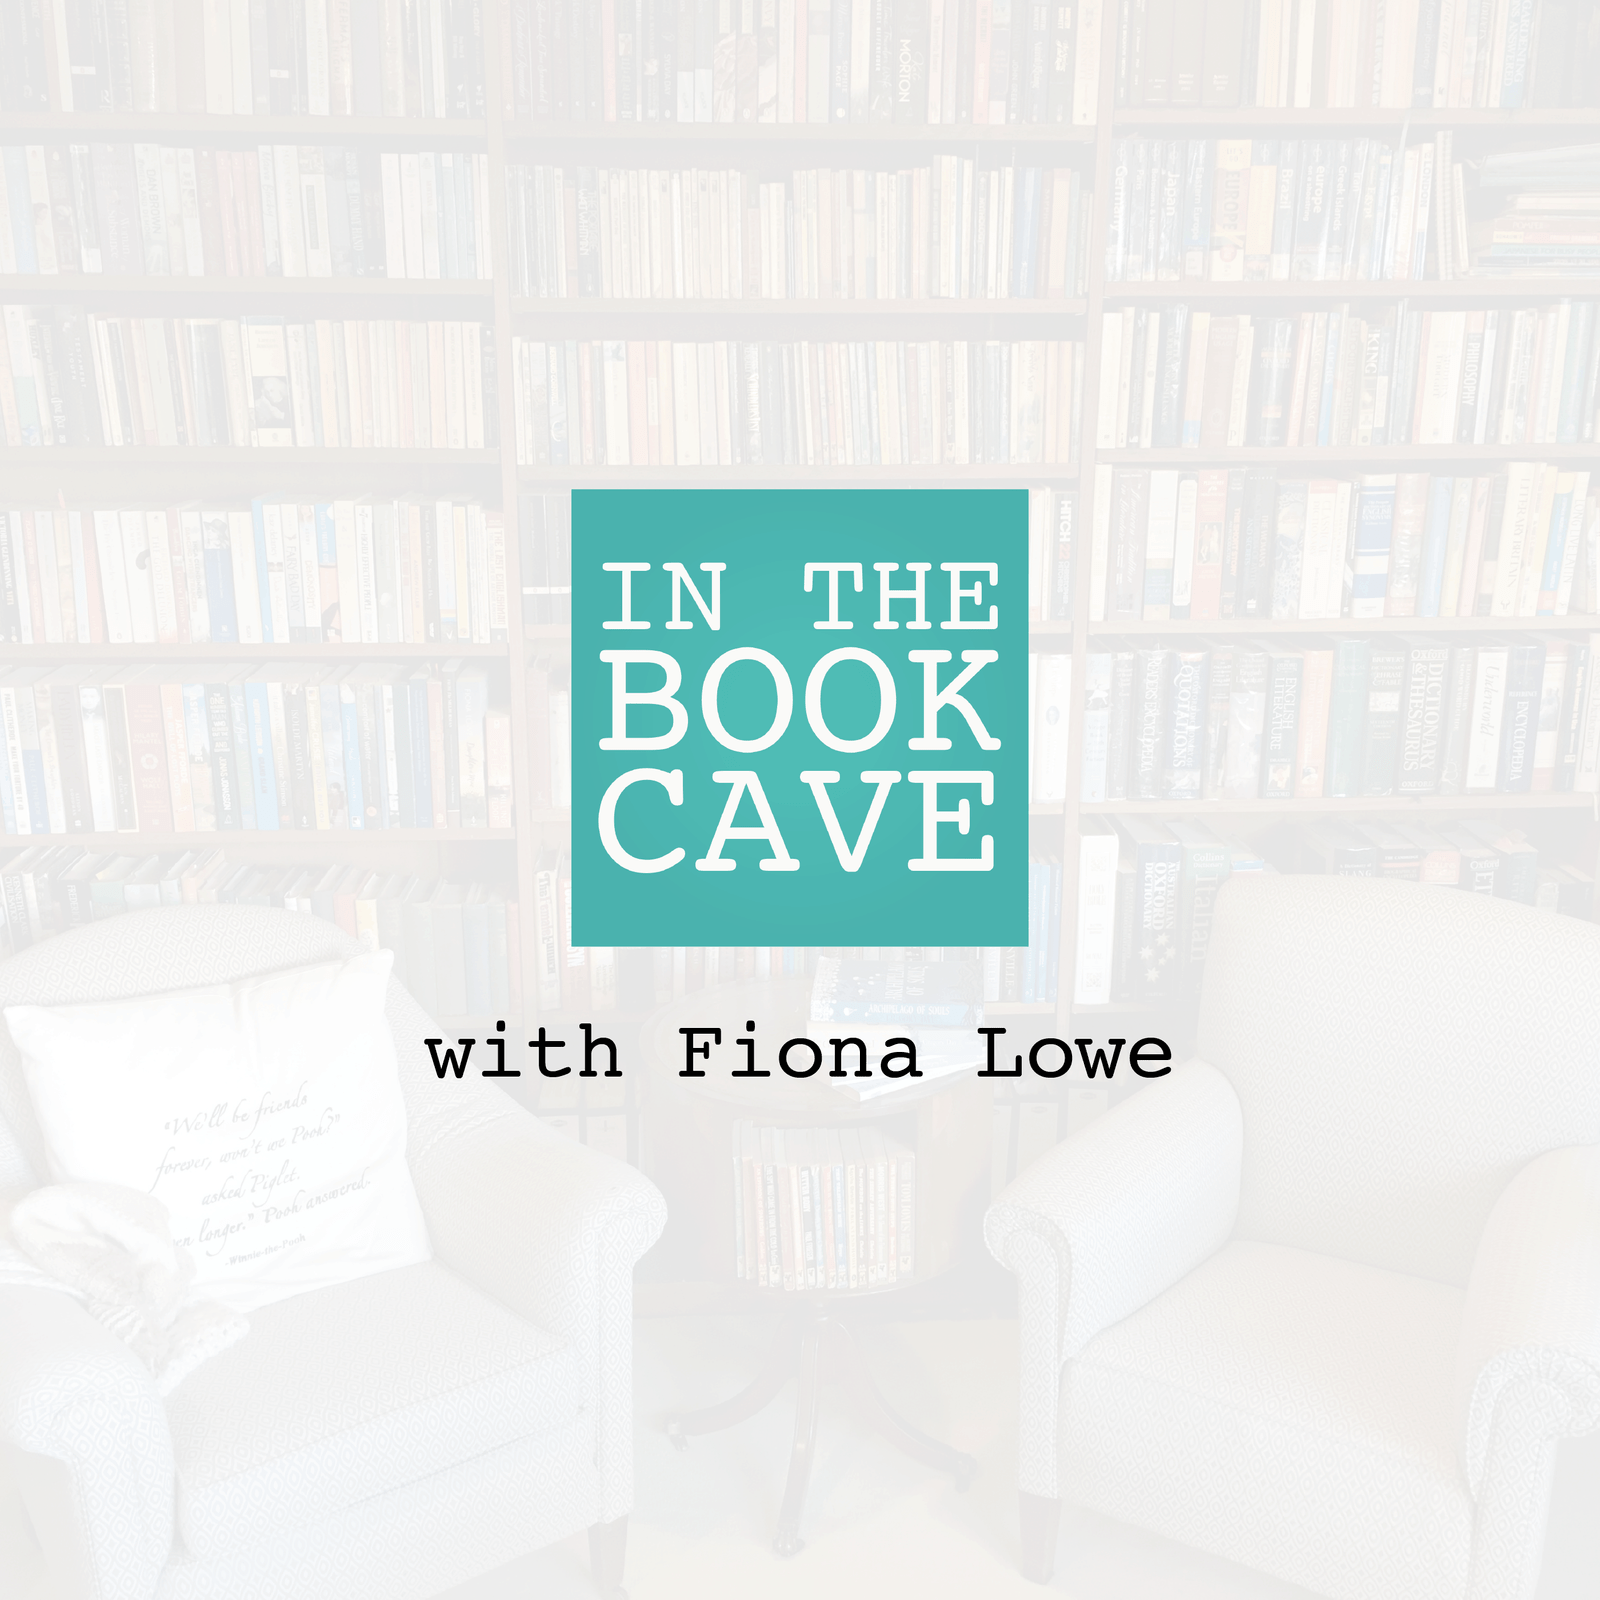 In the Book Cave with Fiona Lowe